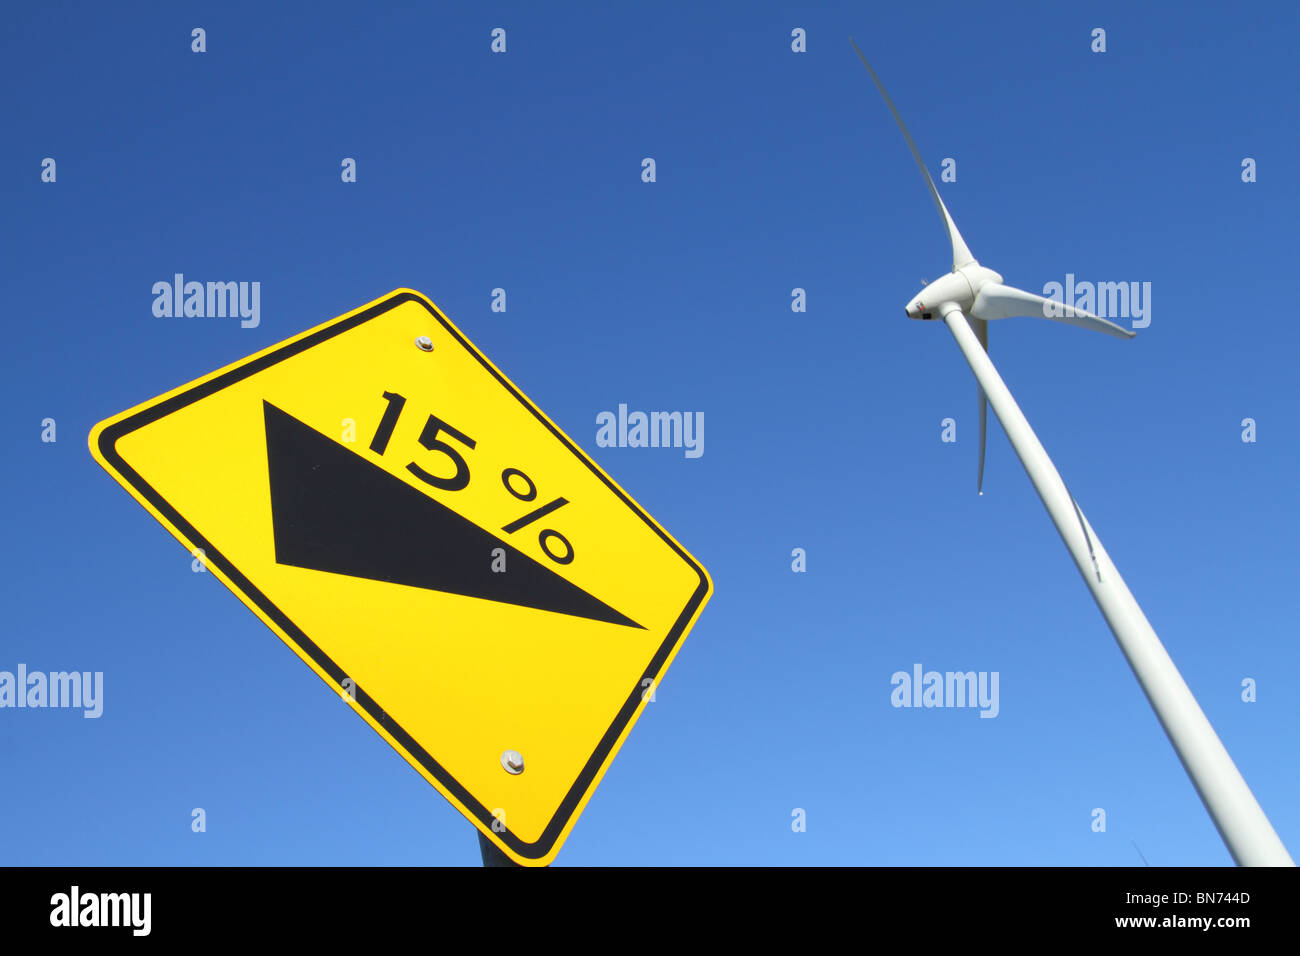 A single wind energy converter and a single signpost photographed next to each other with a blue sky Stock Photo